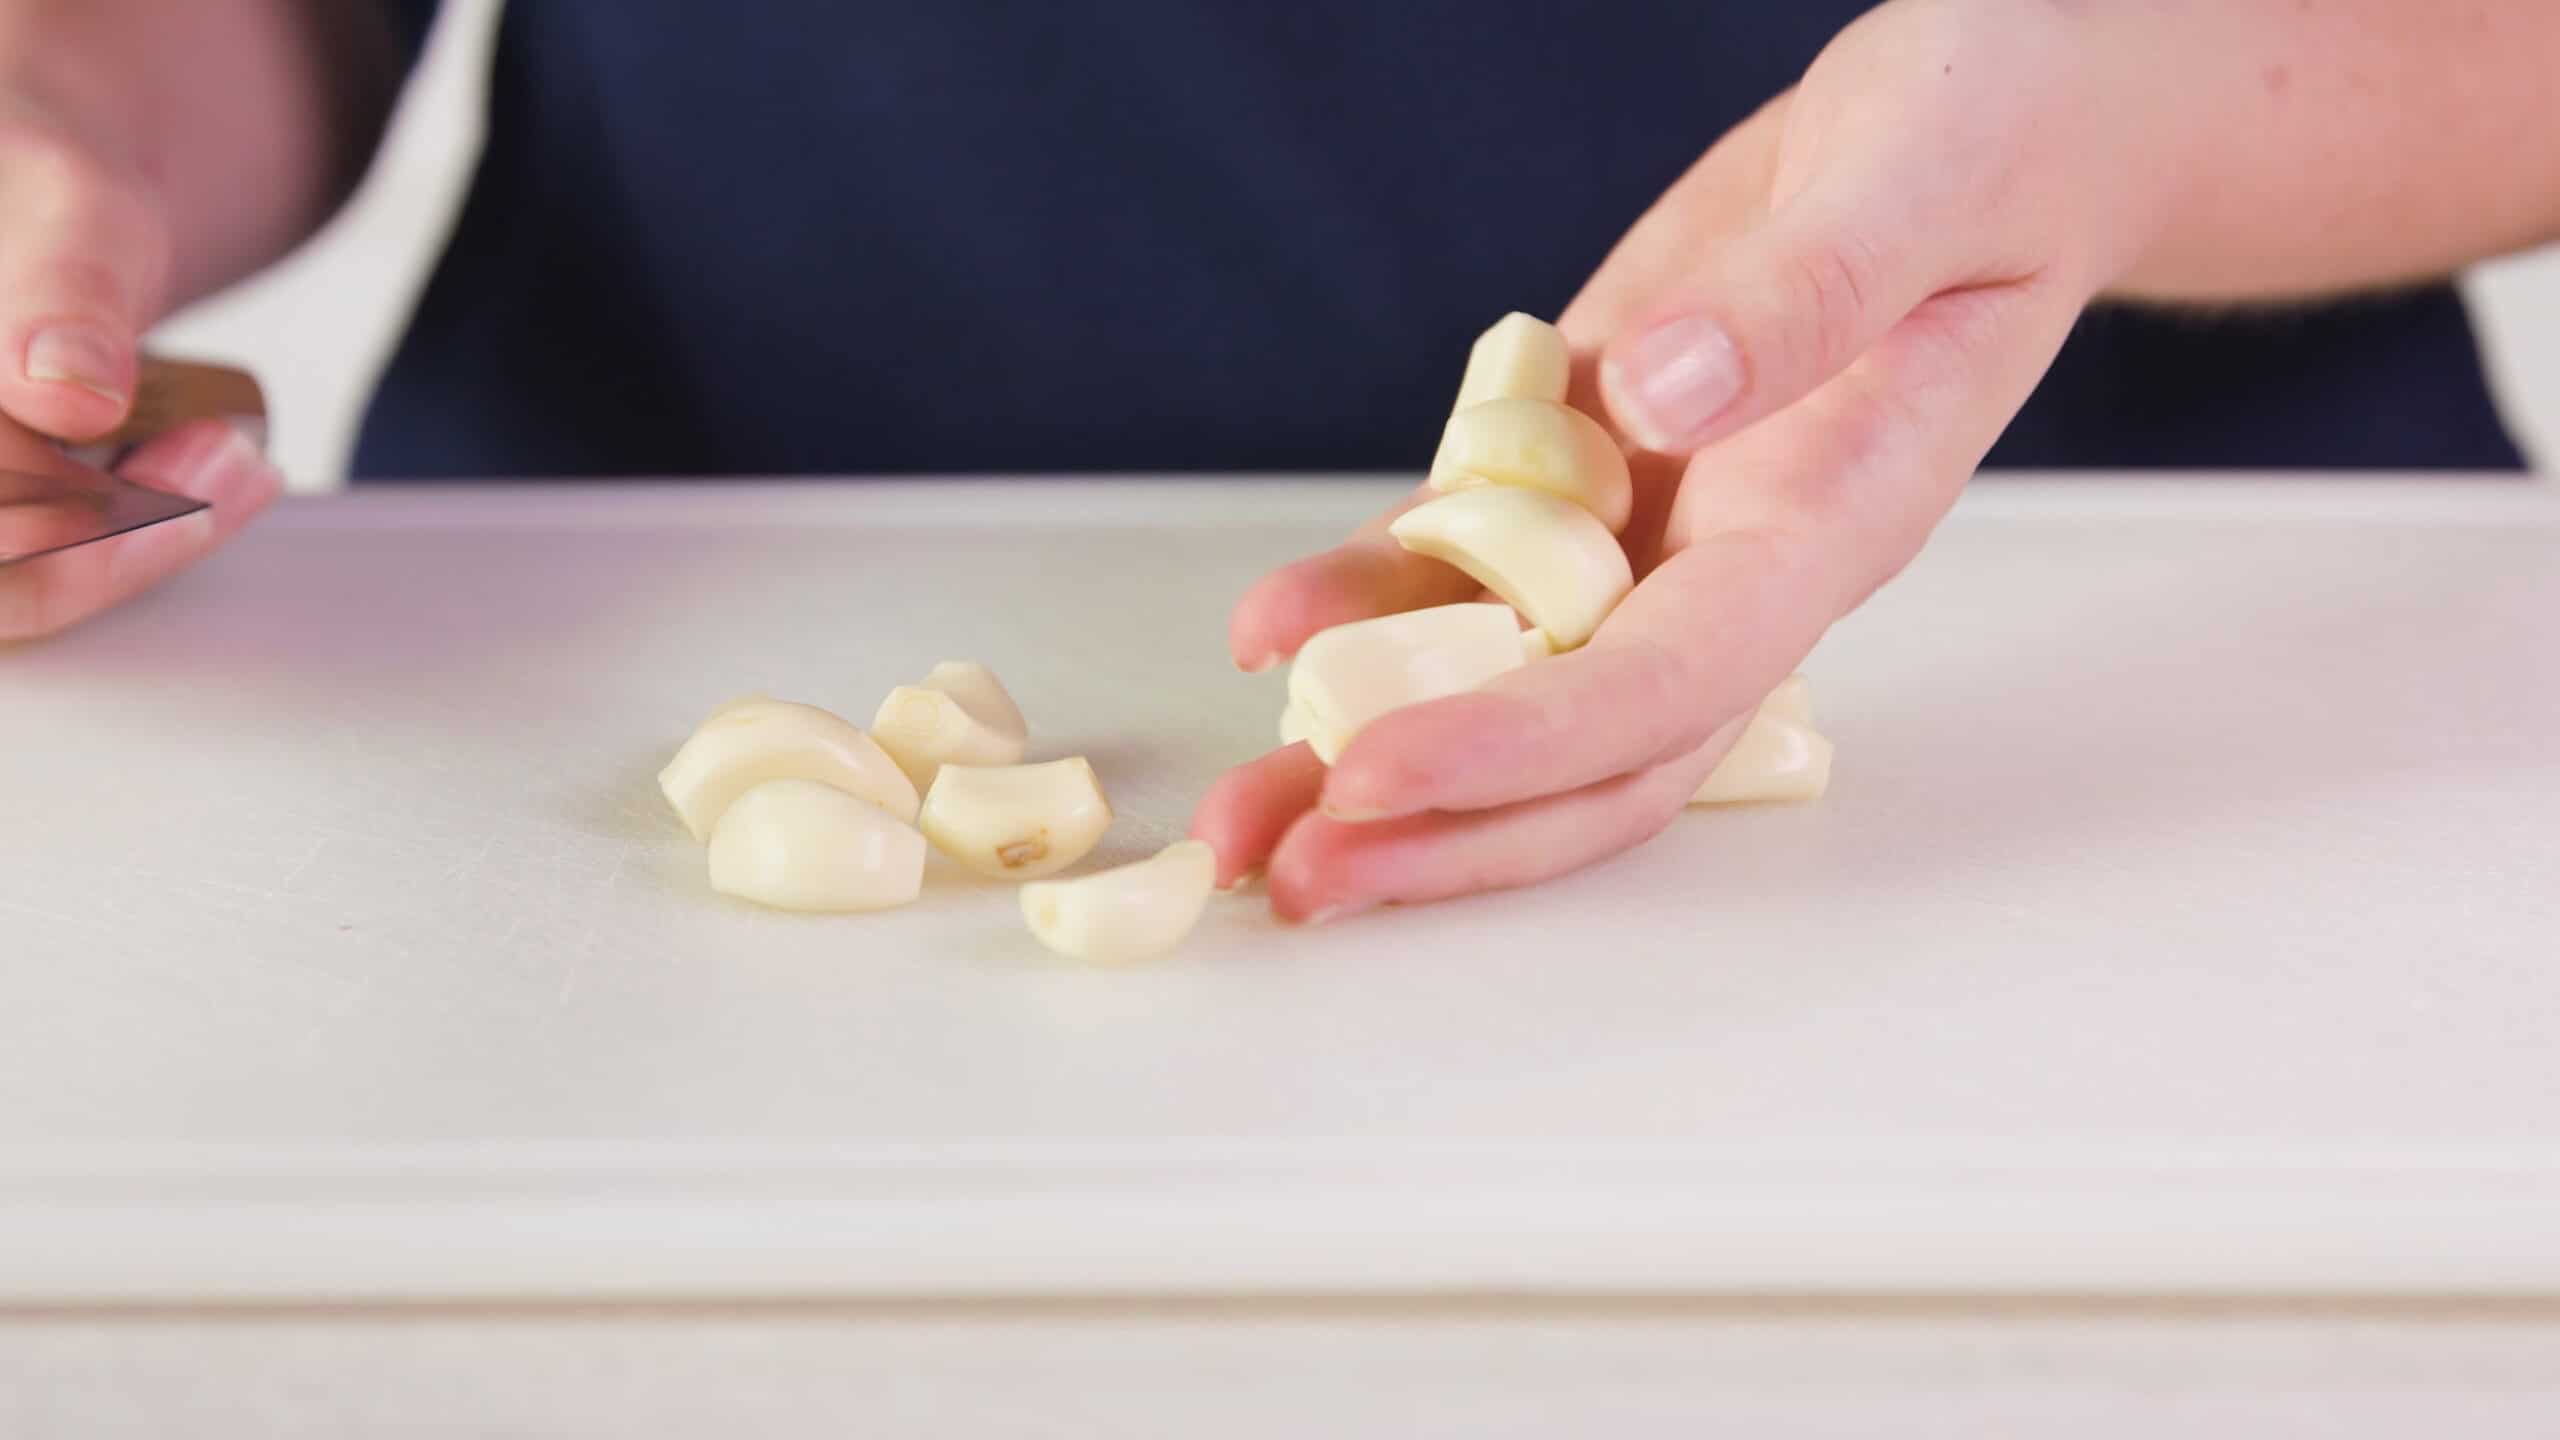 Side view of a white plastic cutting board with about one dozen garlic cloves trimmed and cleaned with a hand holding six of them all on a clean marble countertop.